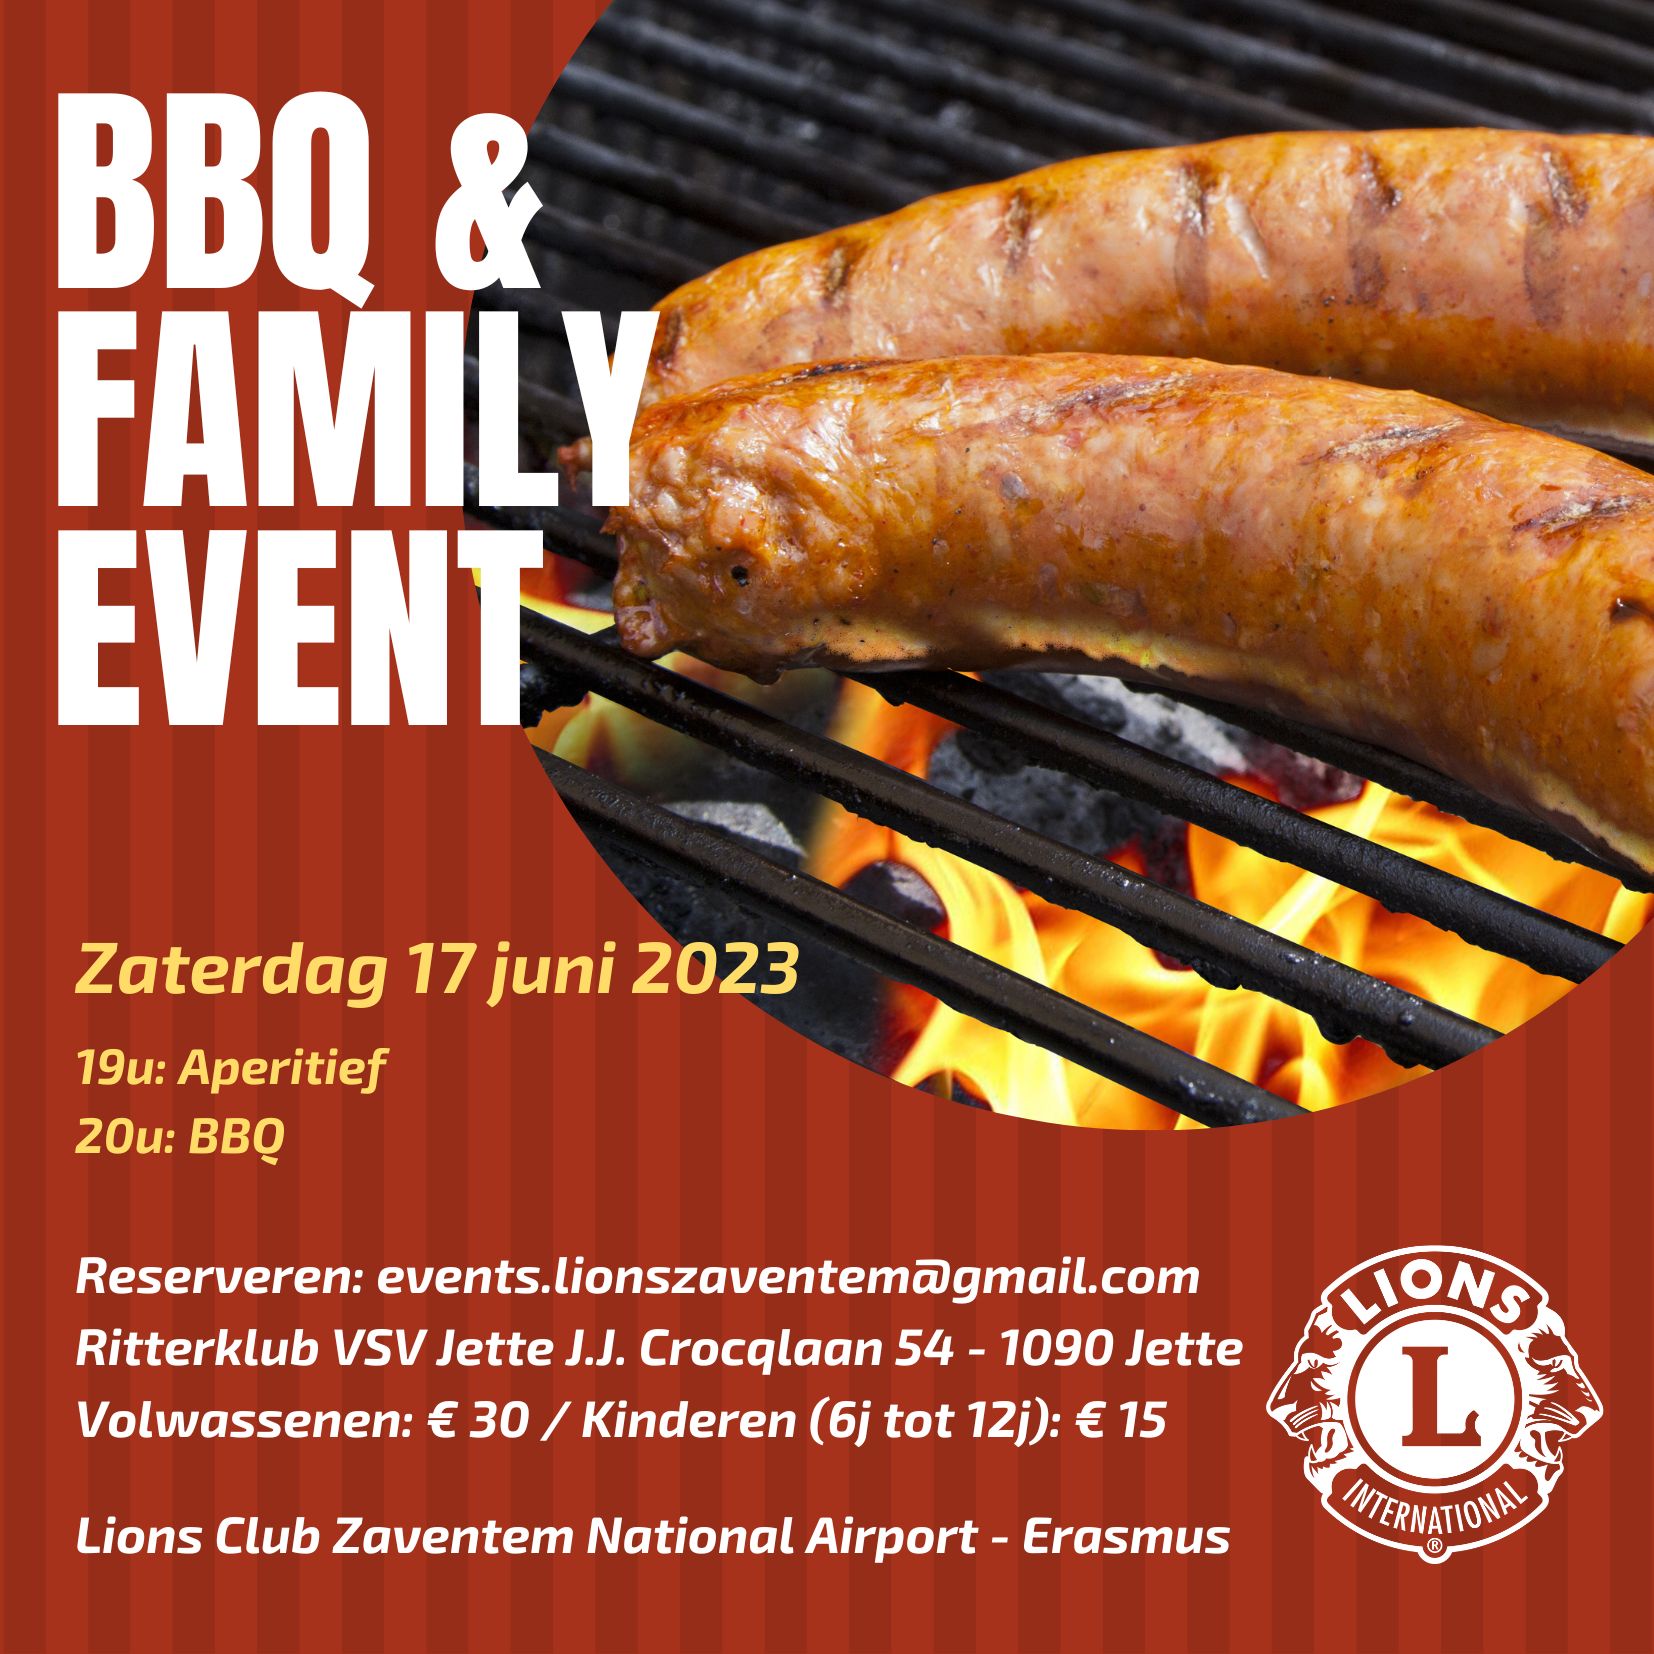 BBQ & Event family